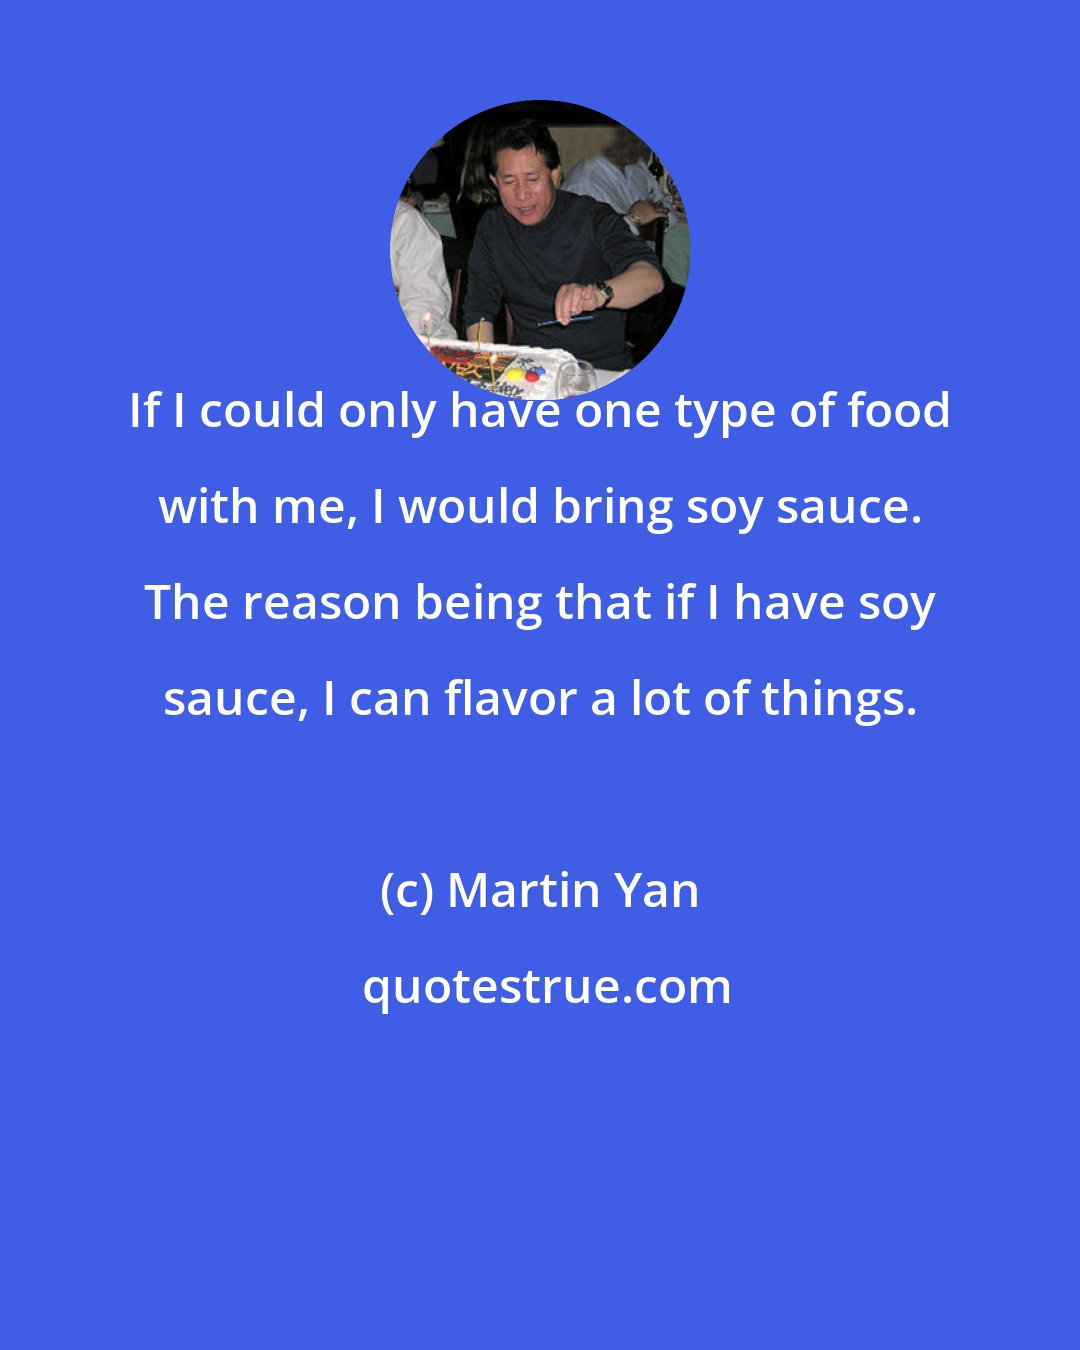 Martin Yan: If I could only have one type of food with me, I would bring soy sauce. The reason being that if I have soy sauce, I can flavor a lot of things.